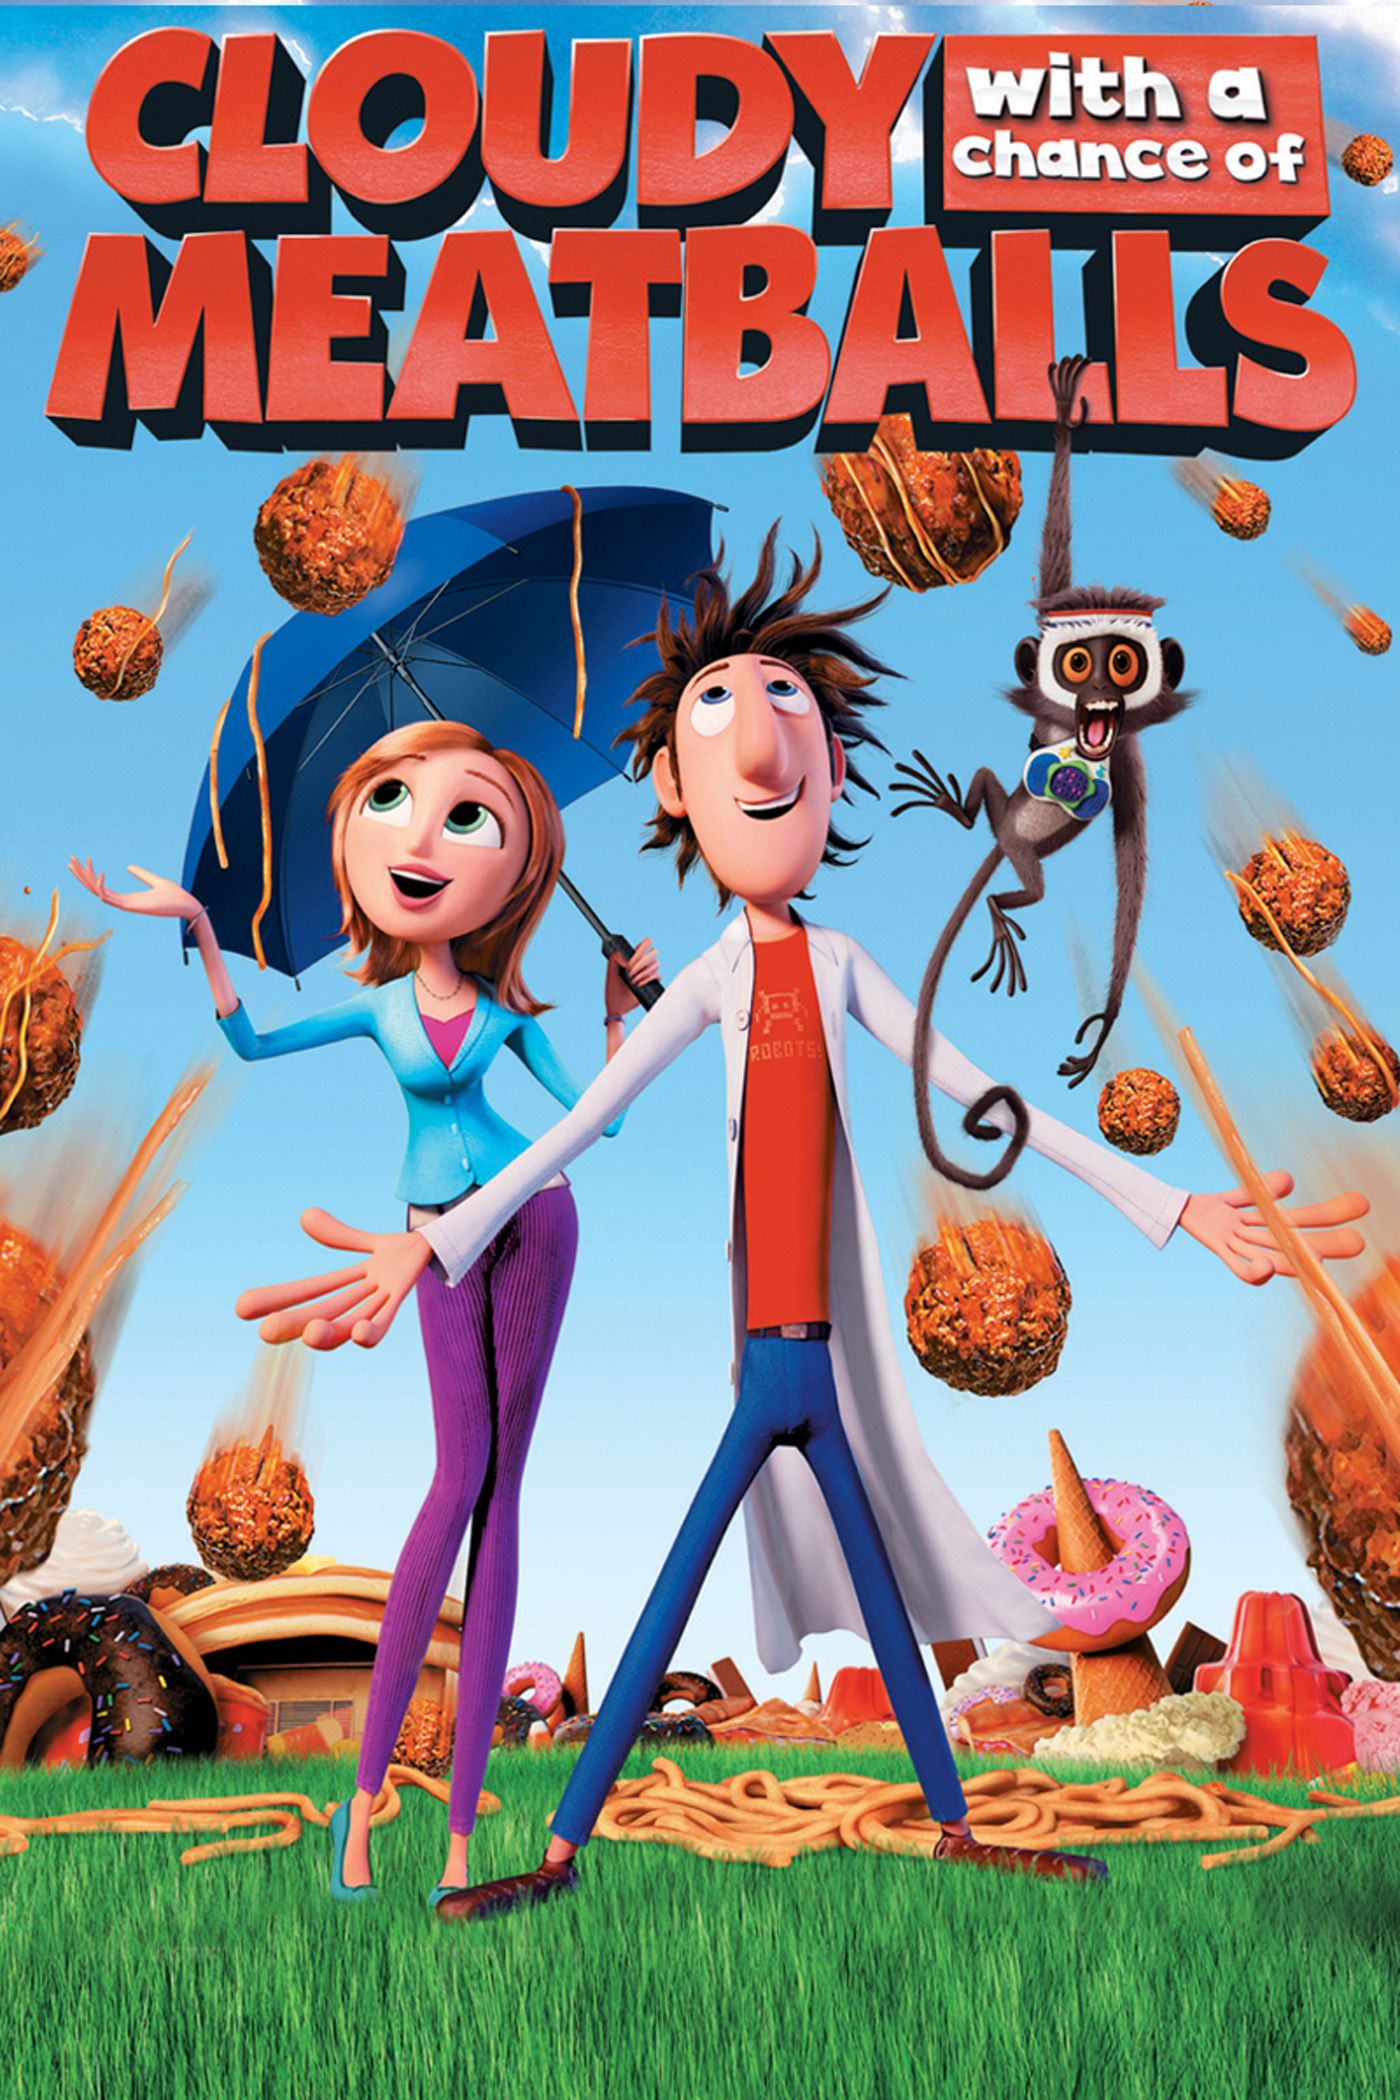 Cloudy With A Chance Of Meatballs 2009 Dual Audio Hindi 1080p 720p 480p BluRay